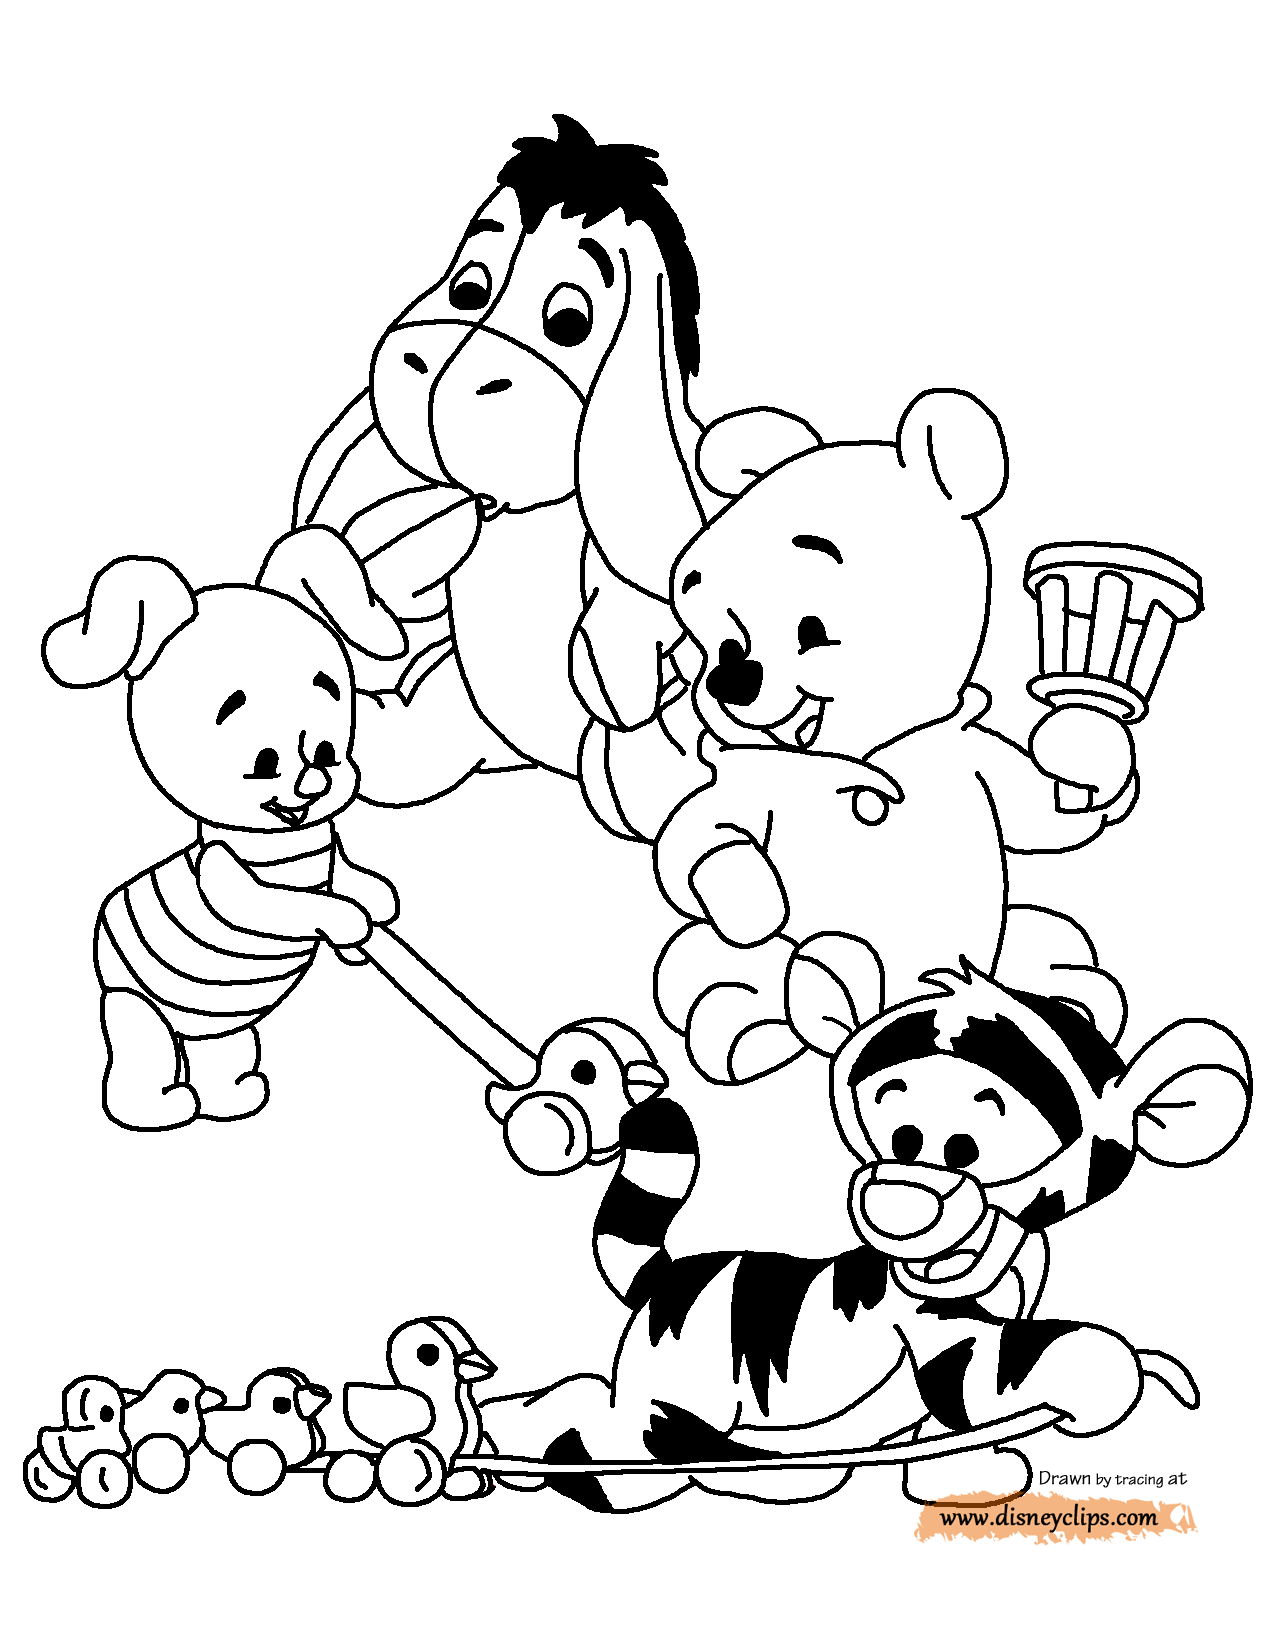 Baby Pooh Printable Coloring Pages   Disney Coloring Book ...